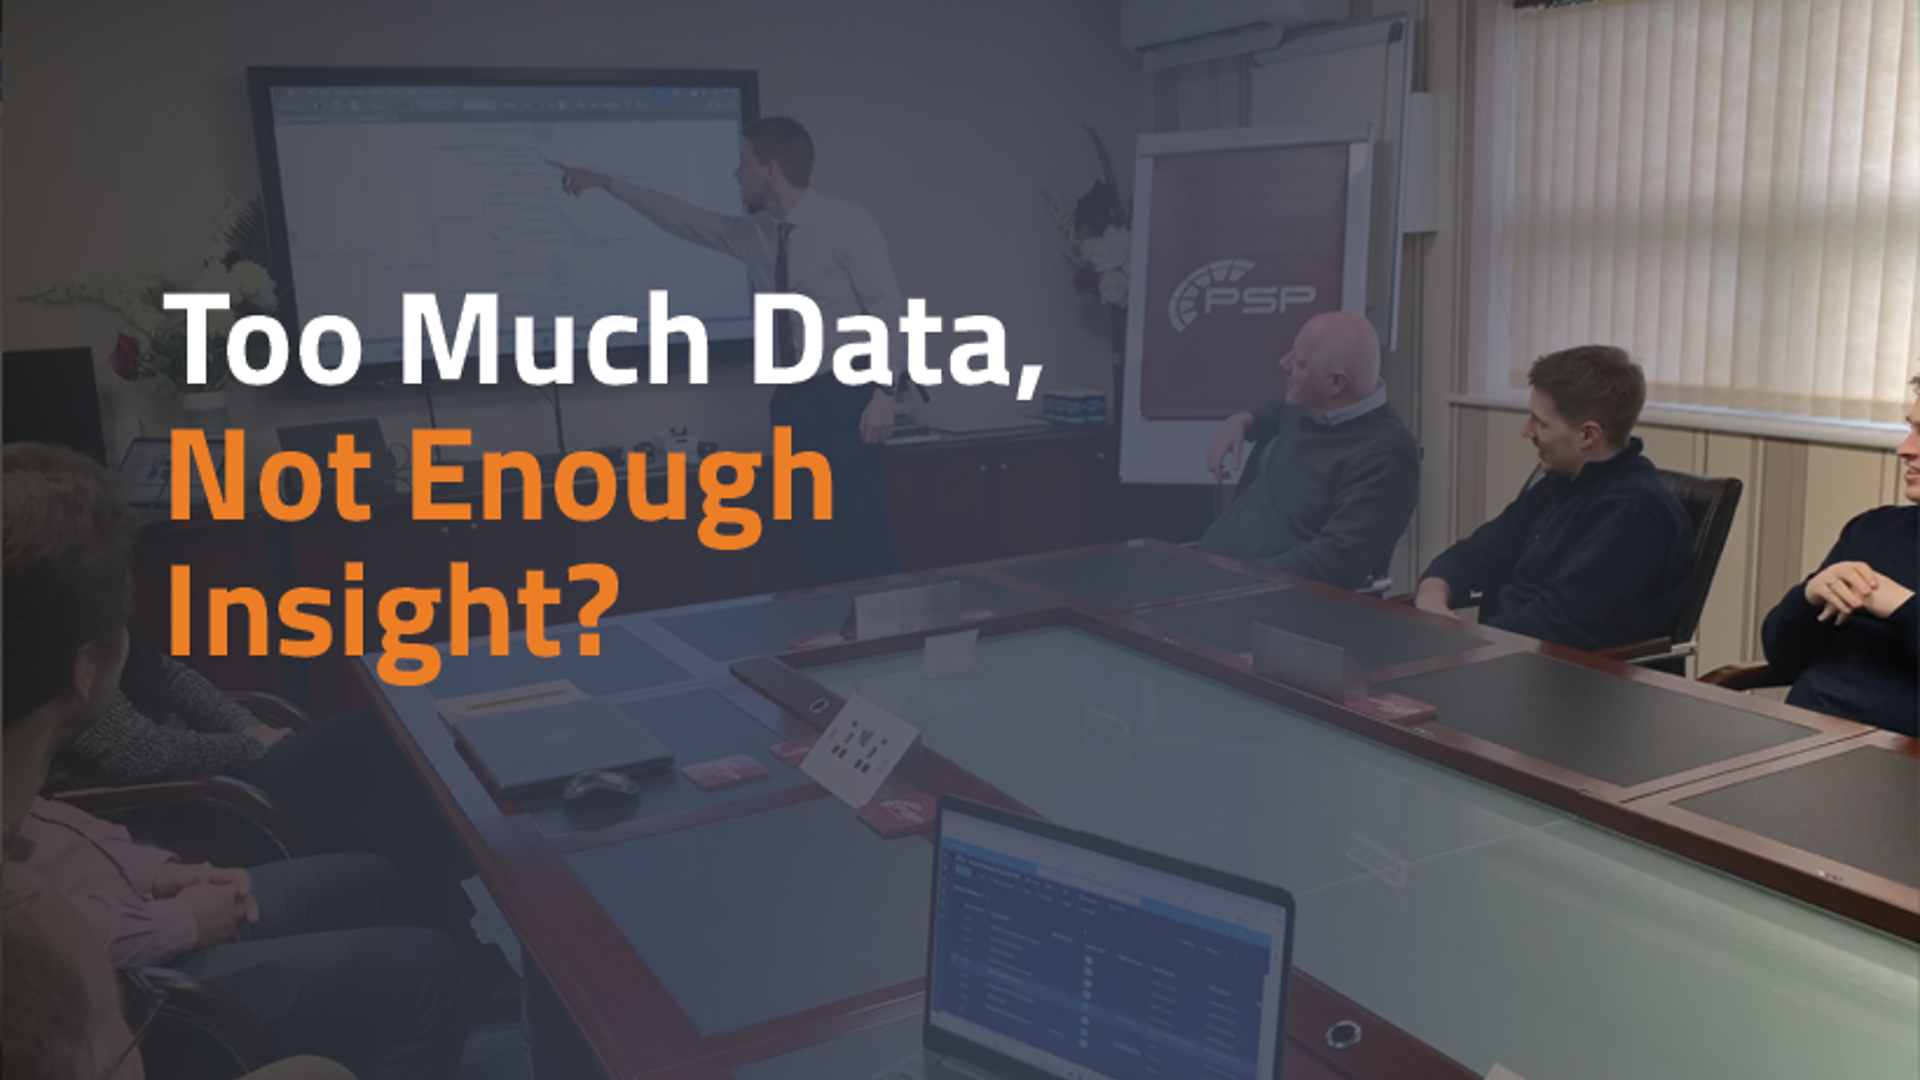 Too much data? Not enough insight?